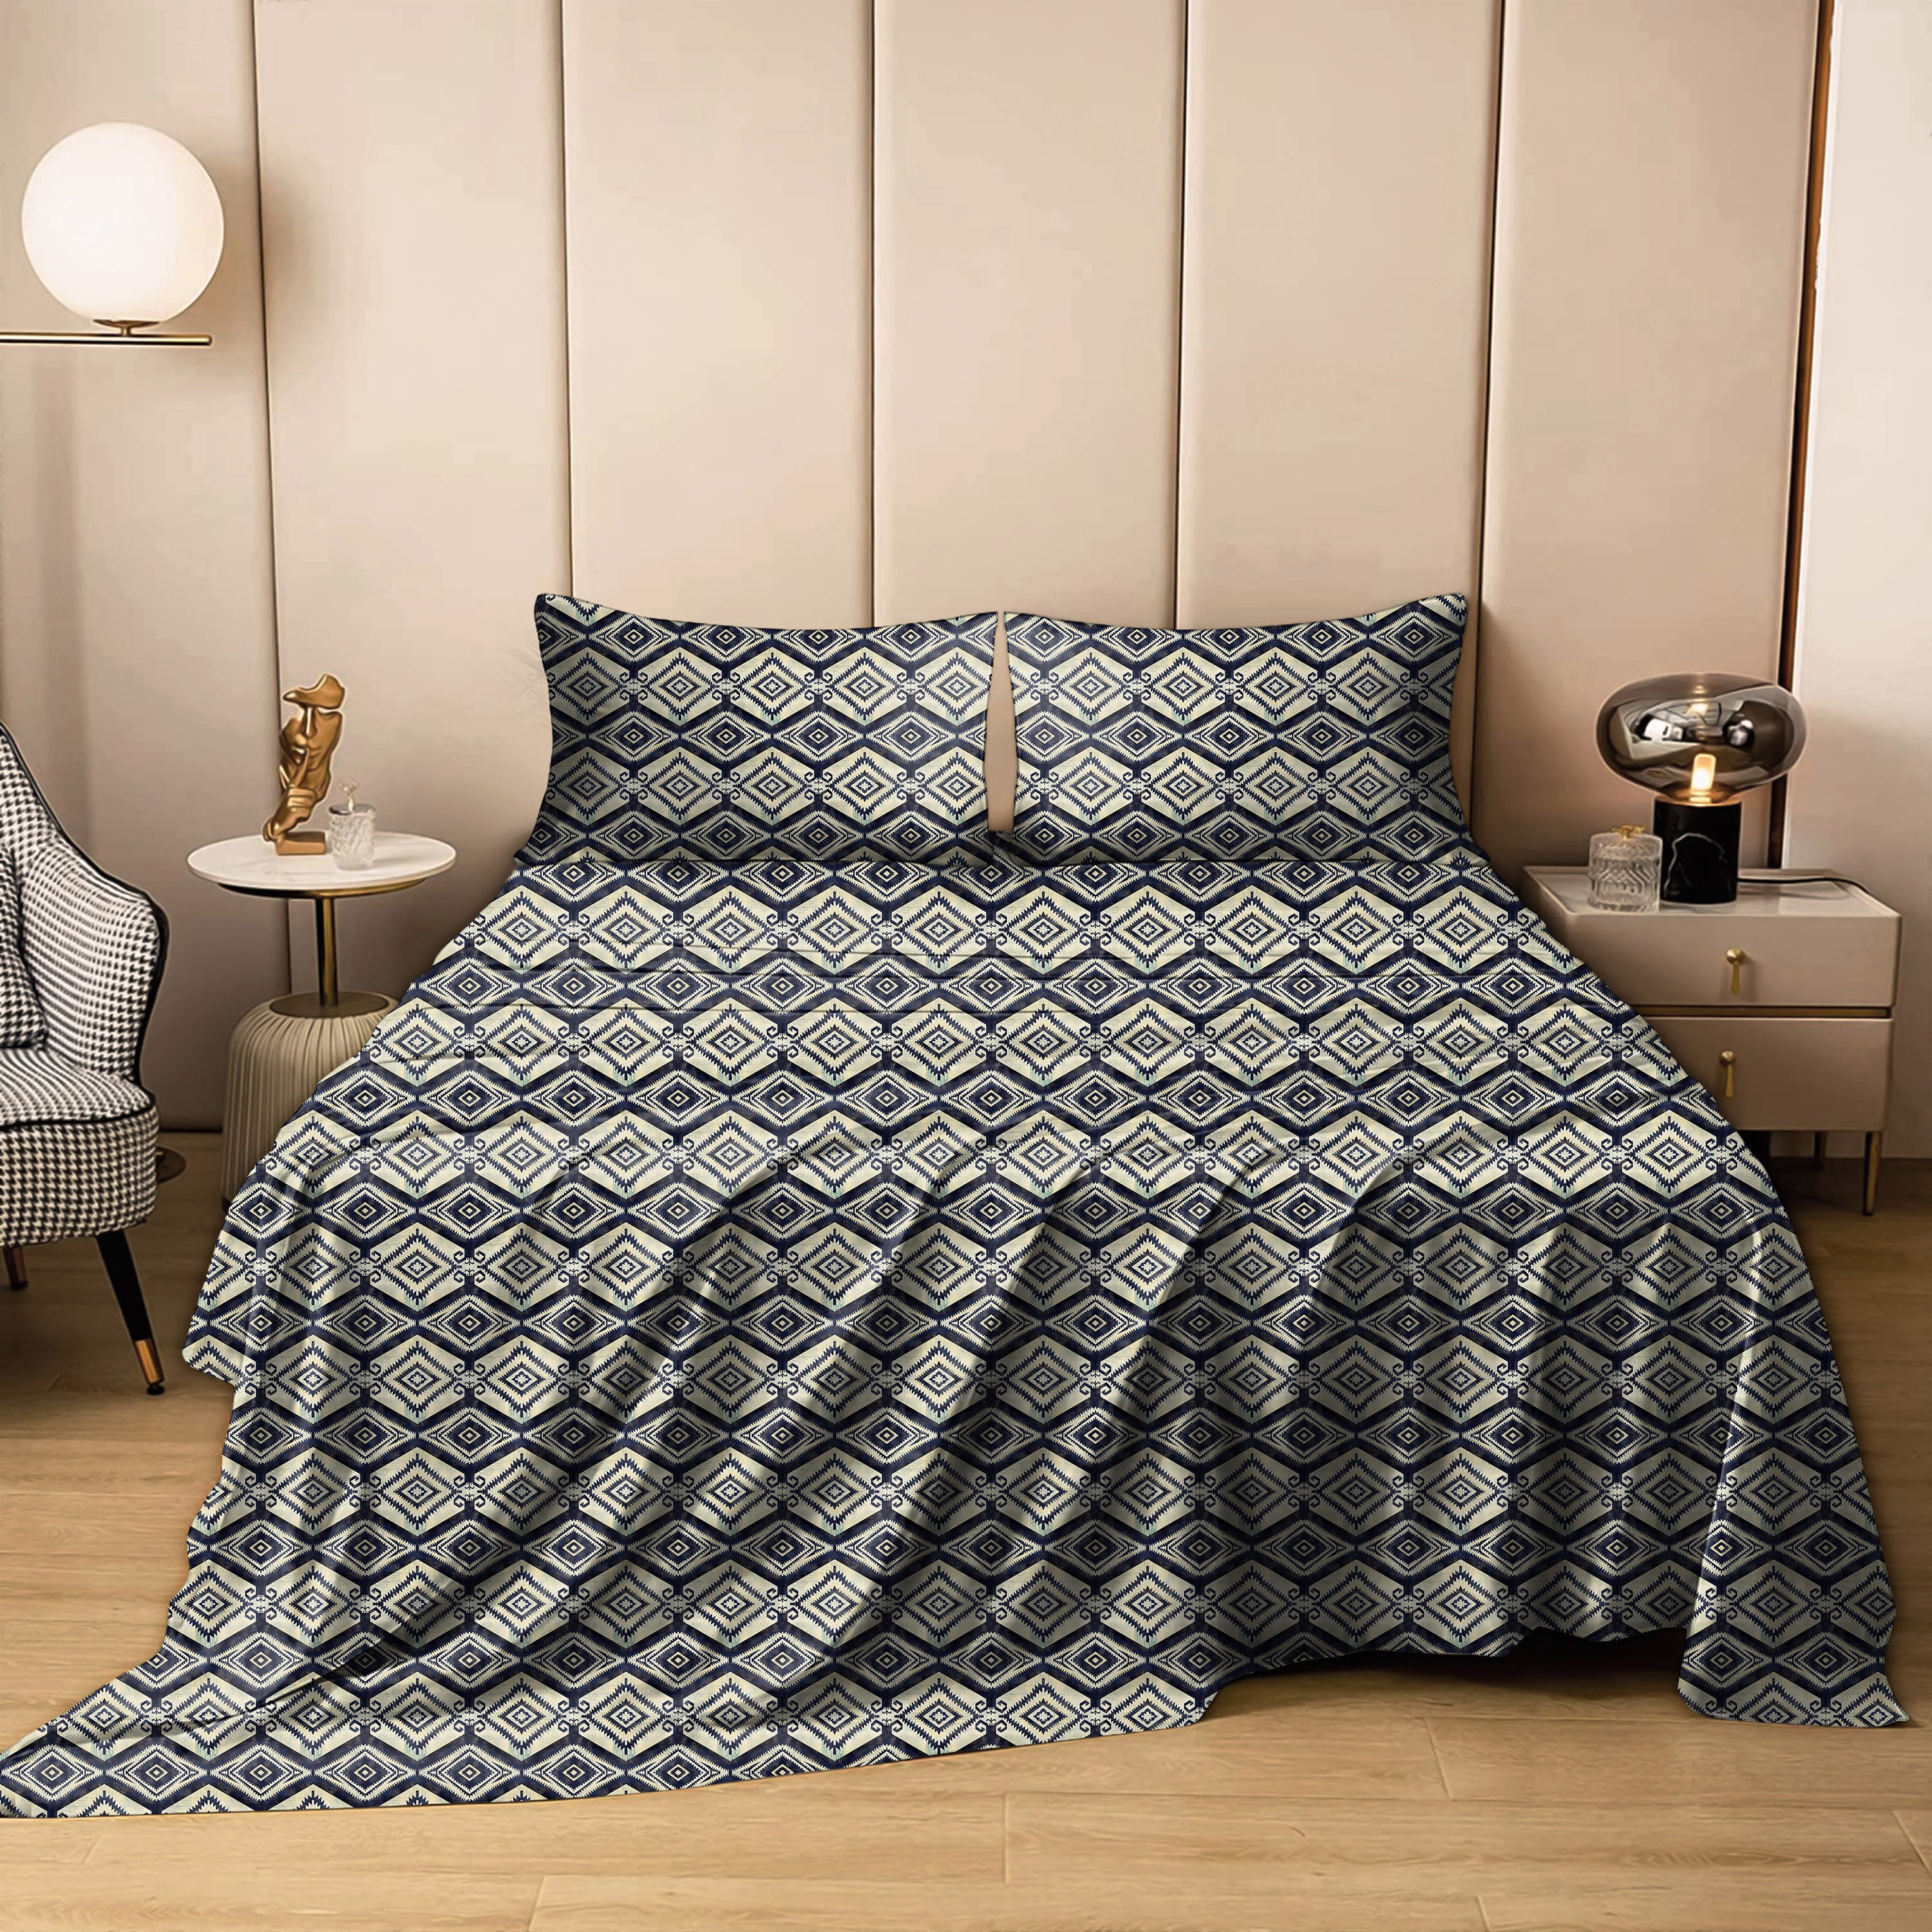 Madrid Navy Bedcover for Double Bed with 2 PillowCovers King Size (104" X 90")